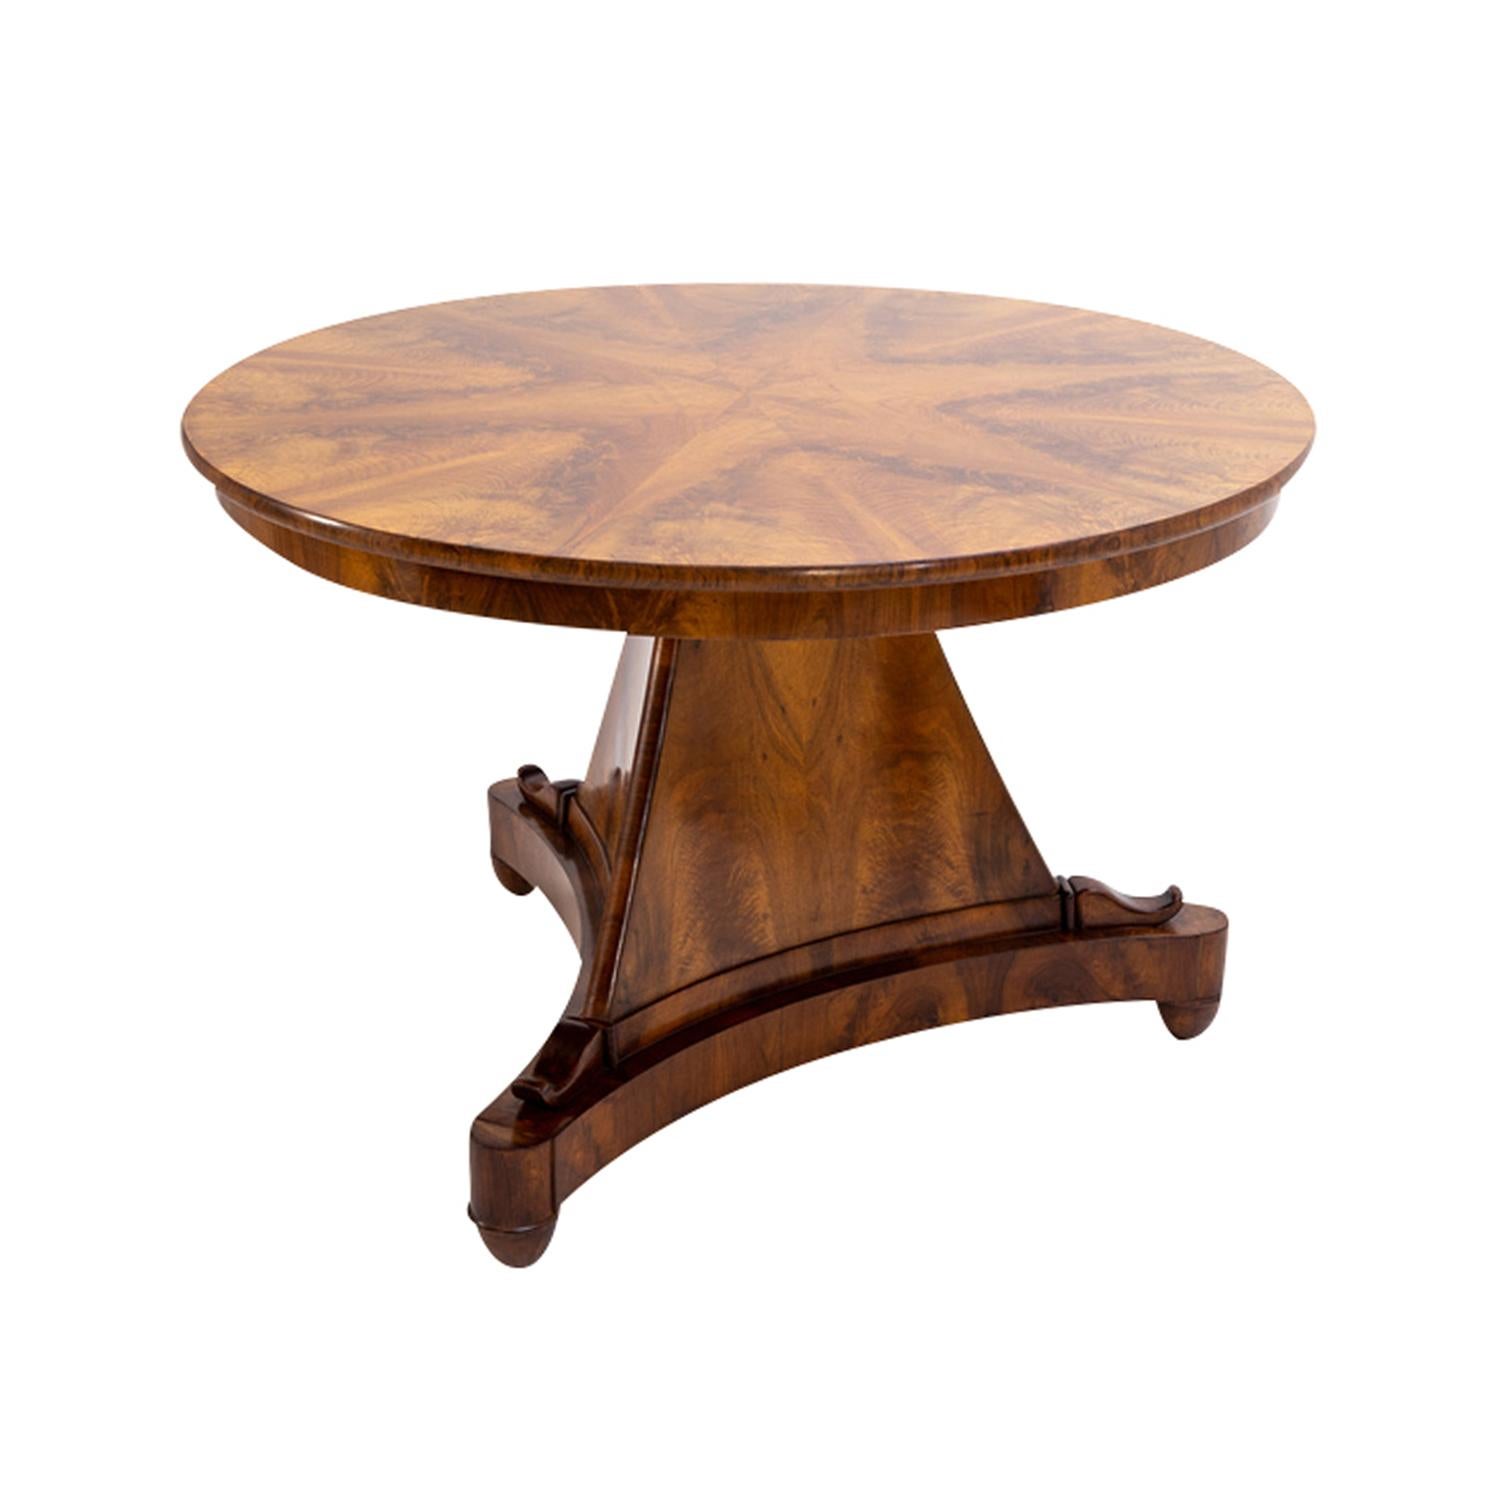 19th Century German Biedermeier Polished Walnut Foldable, Antique Center Table In Good Condition For Sale In West Palm Beach, FL